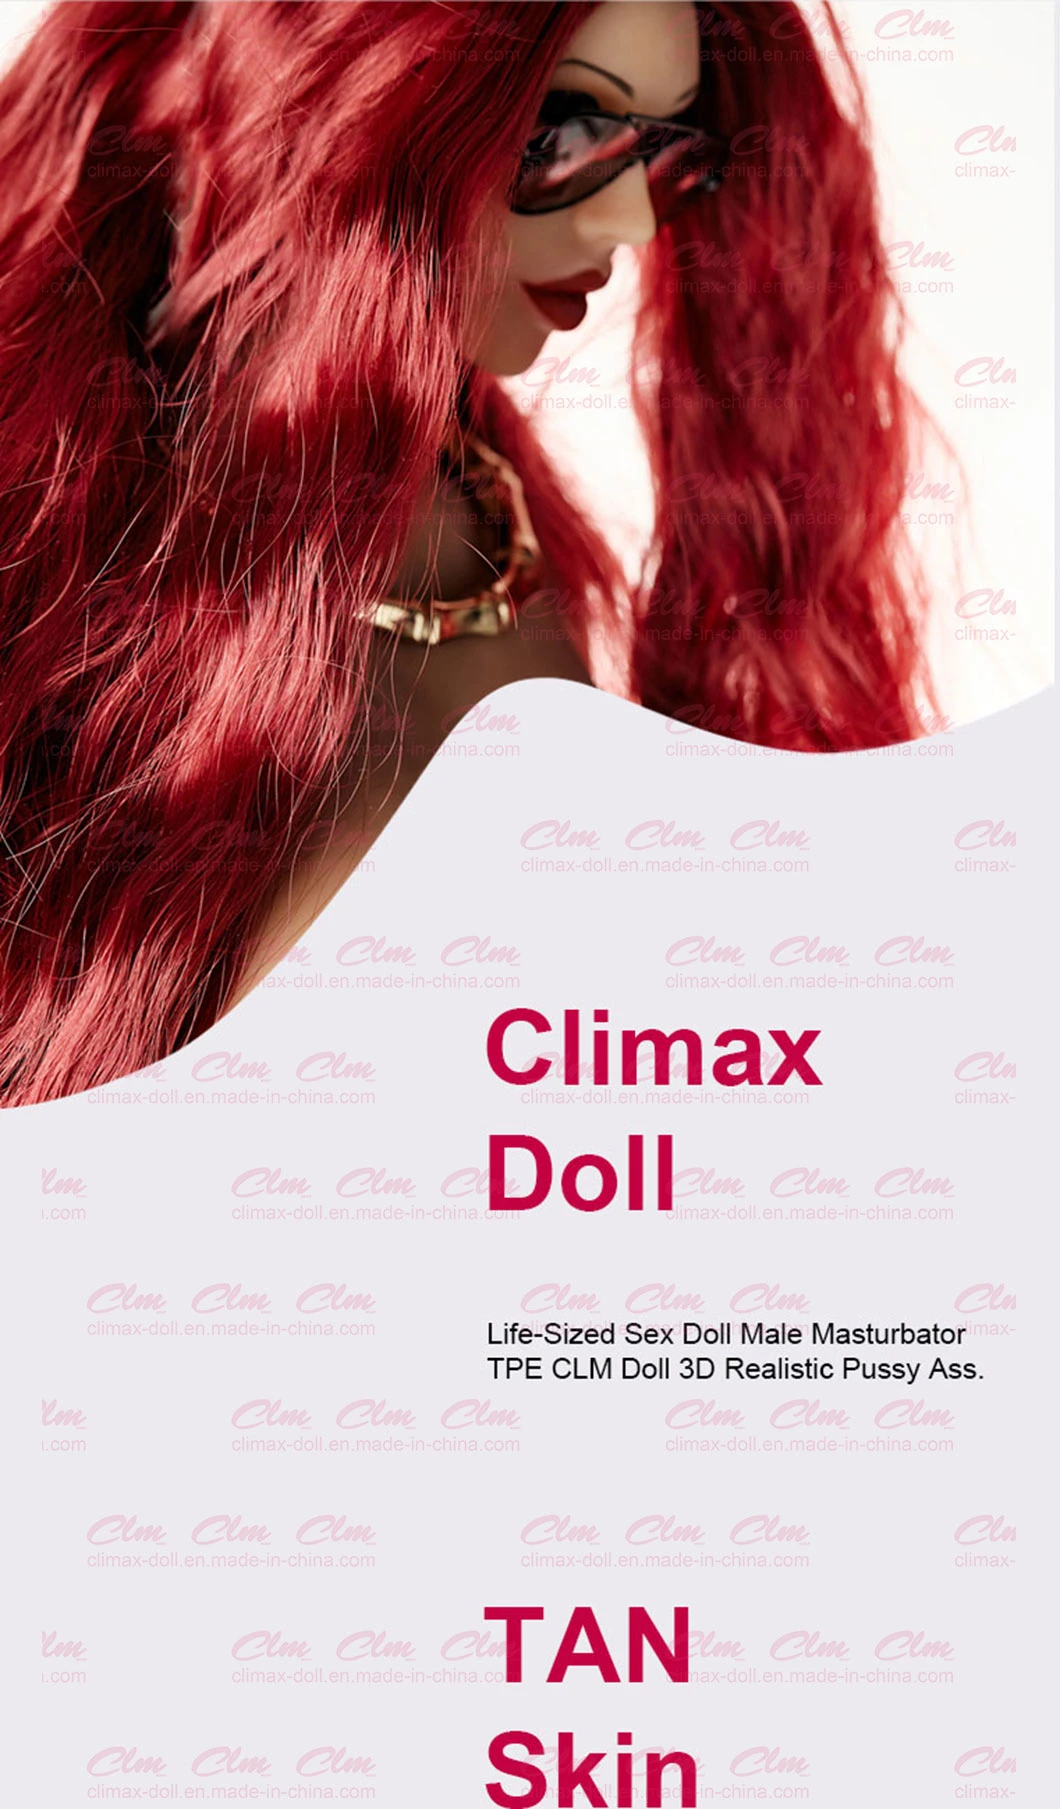 Clm (Climax Doll) 72cm Excellent Quality Cost Effective Realistic Appearance True Companion Doll Adult Toy